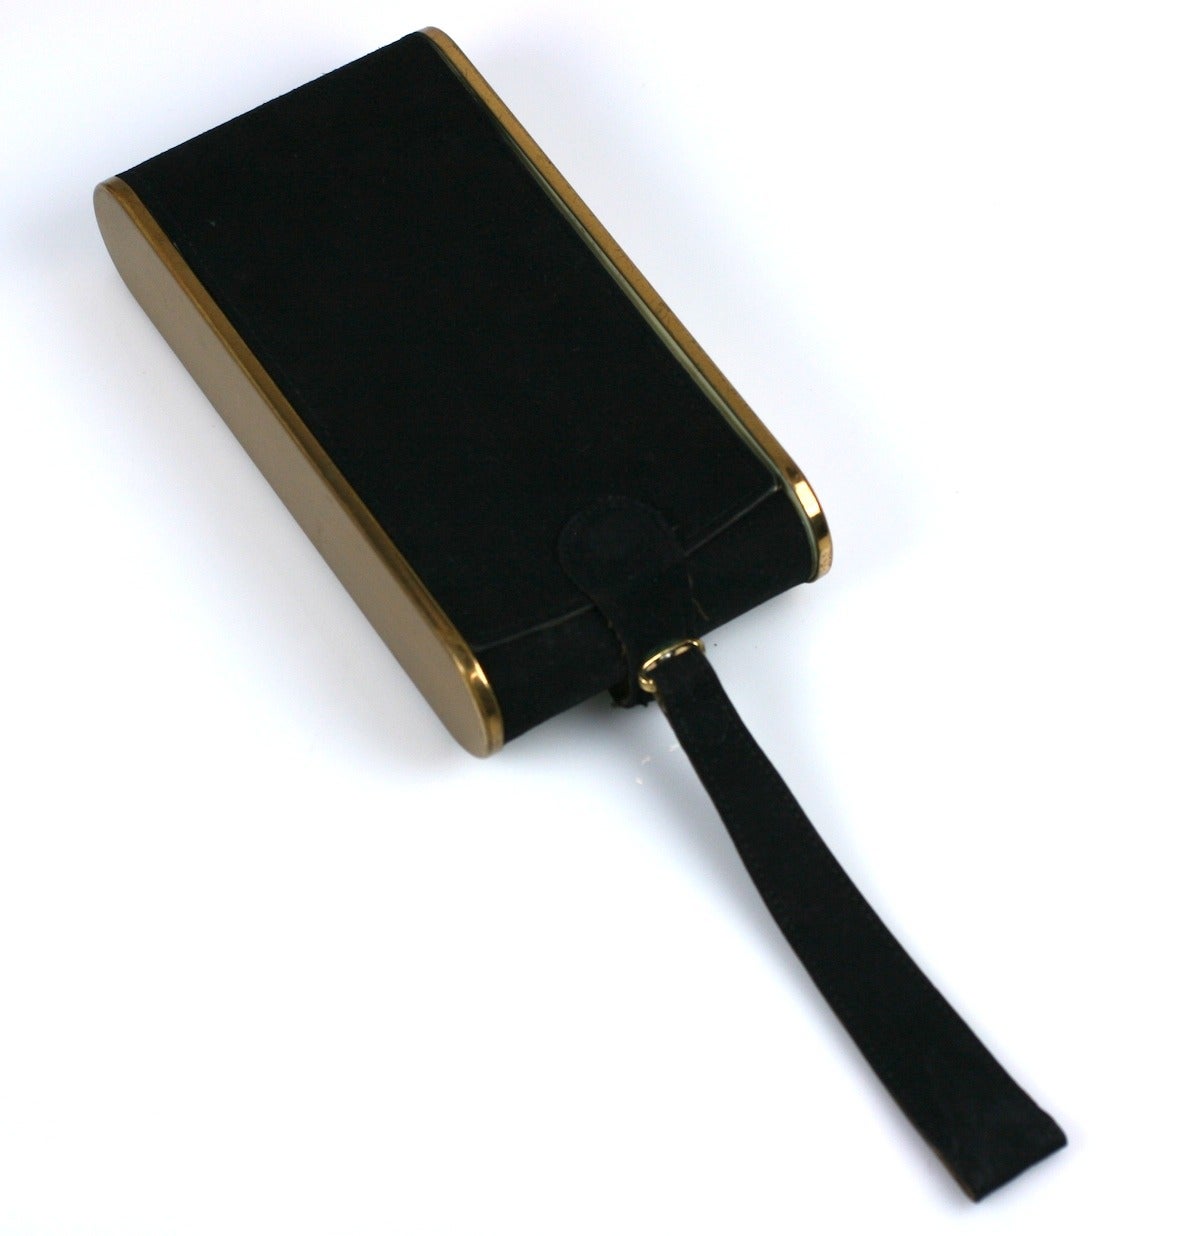 Wadsworth black antelope suede and gilt metal surealist figural minaudière.
The early camera shape with attached strap handle, interior mirror,and multiple fitted compartments. 1950's USA.